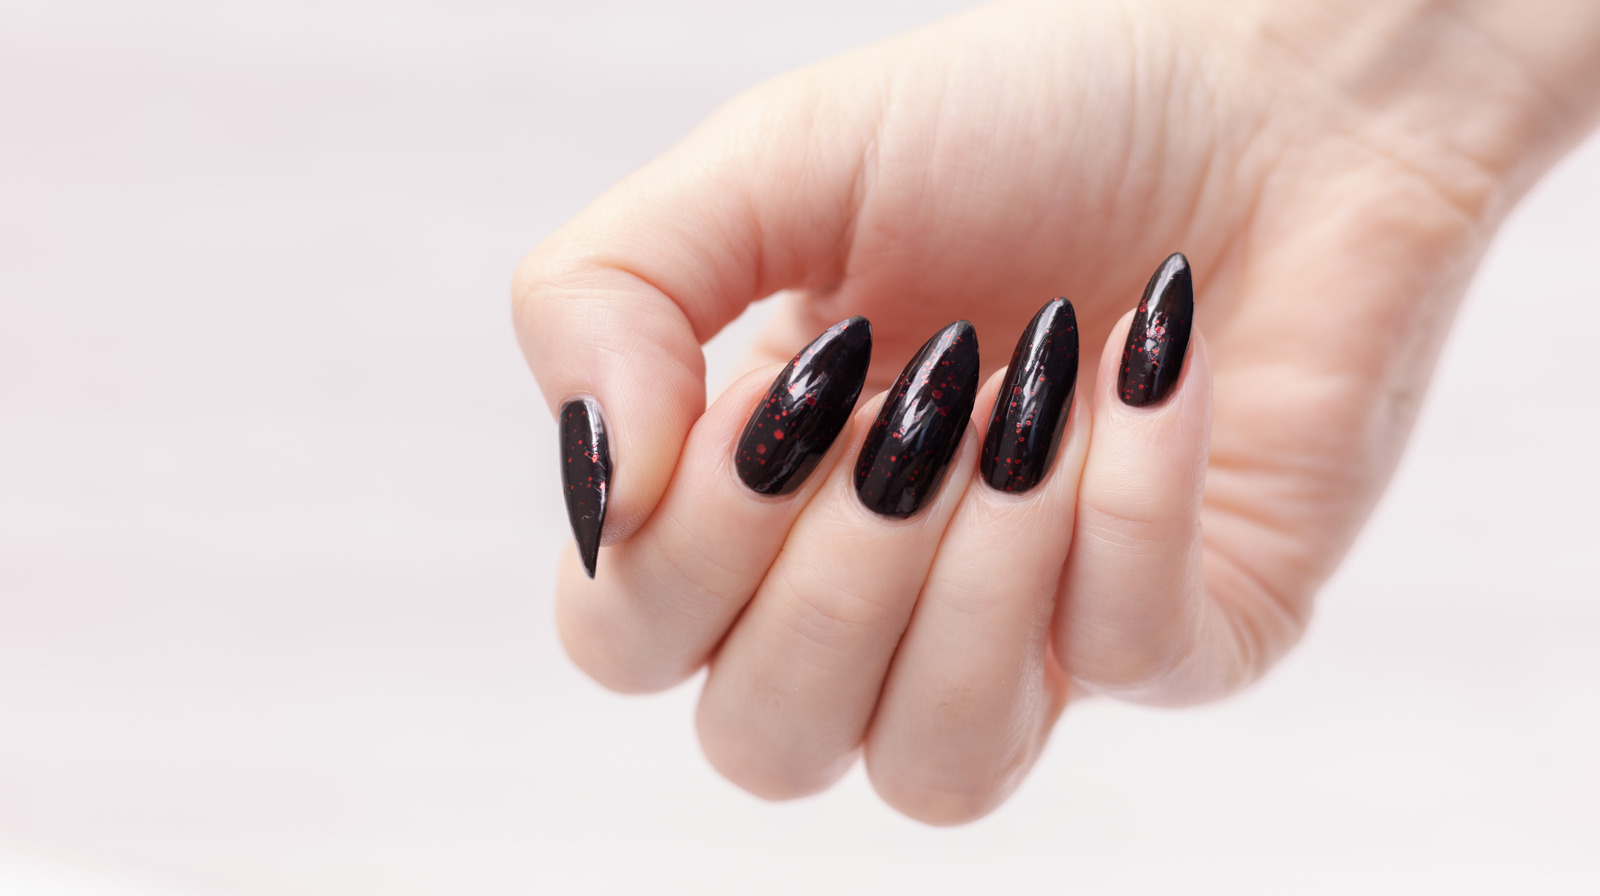 4. "Black and white striped nail design for Wednesday Addams" - wide 3